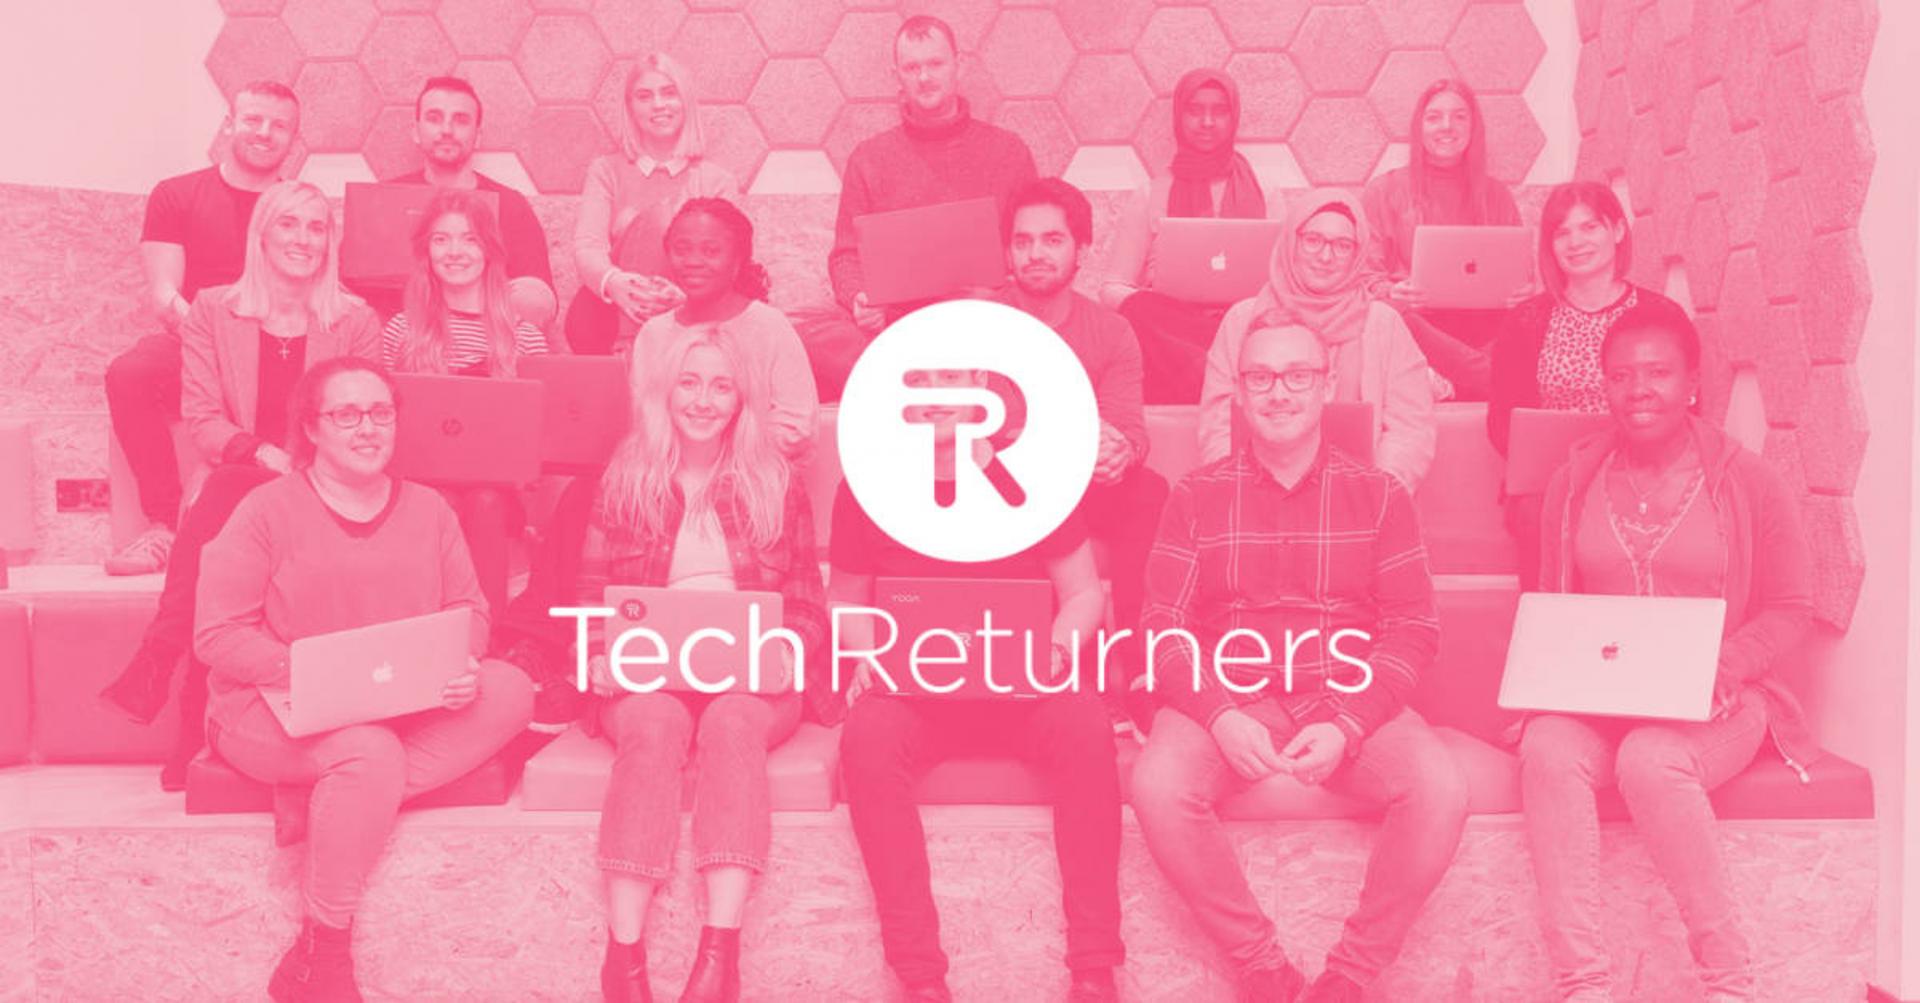 Tech workforce re-entry training firm acquired at 2.8x revenue